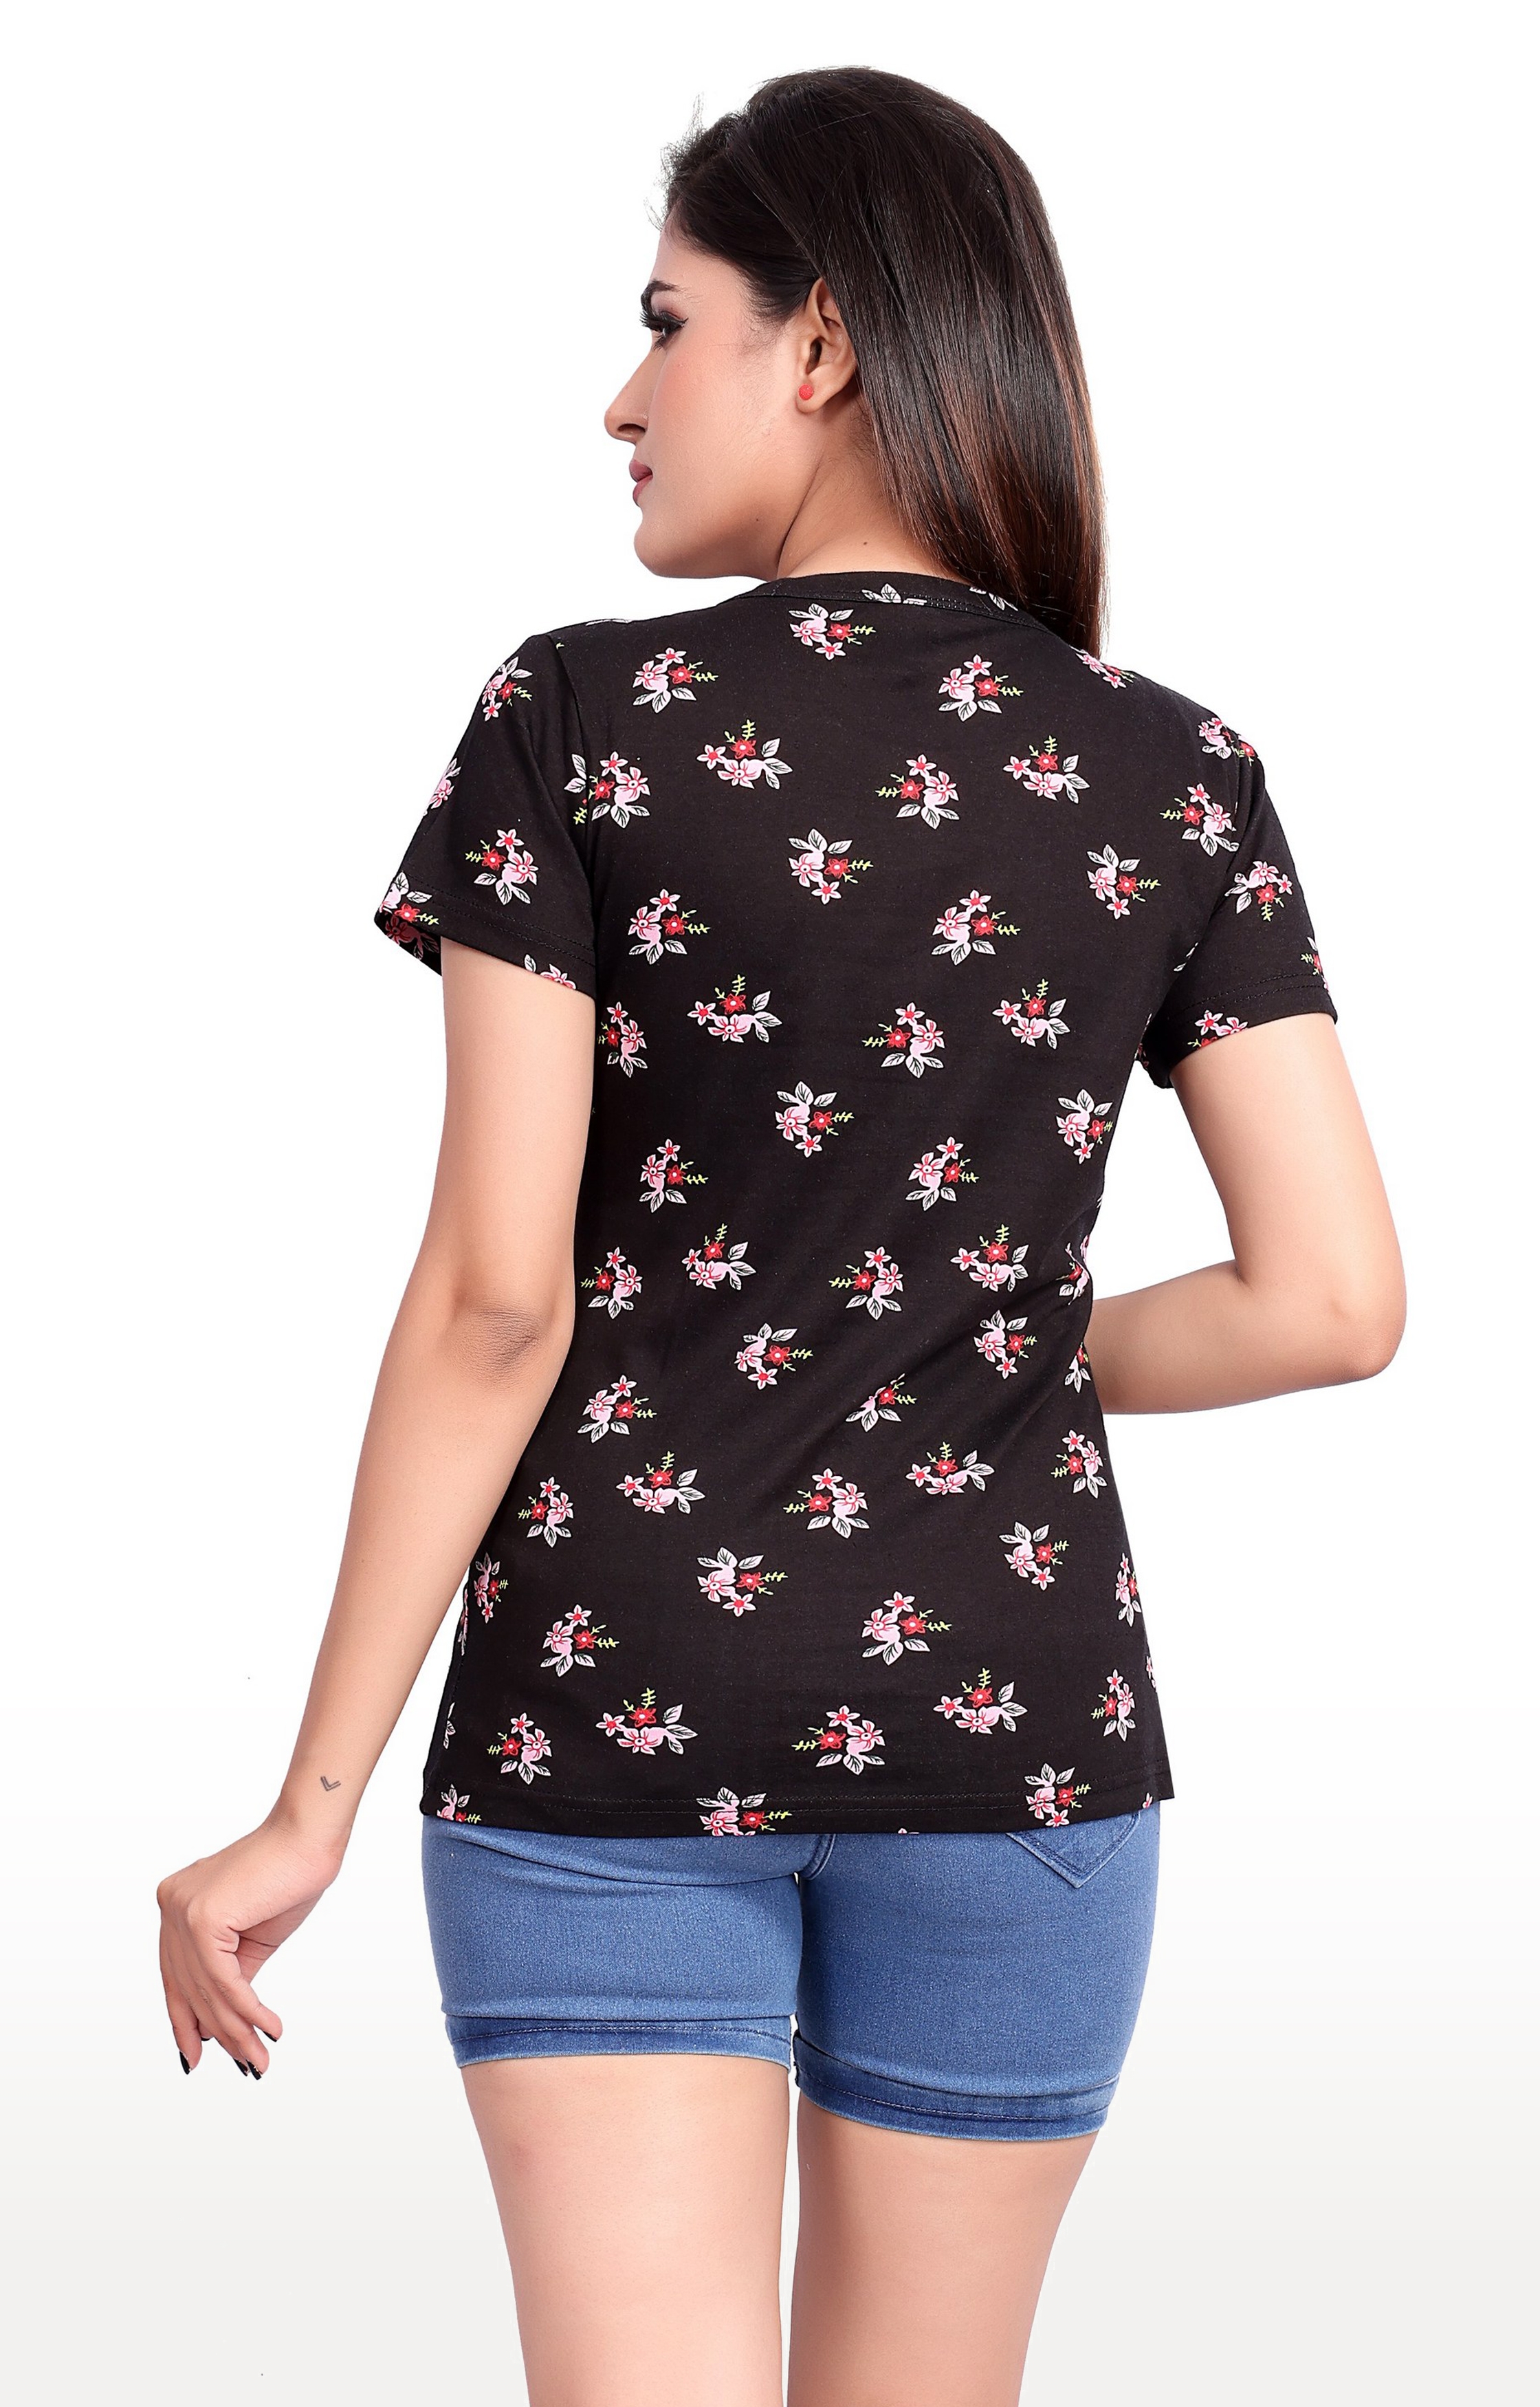 Impex | Impex Women's Black Cotton Hosiery Printed Floral Round Neck T-shirt 2